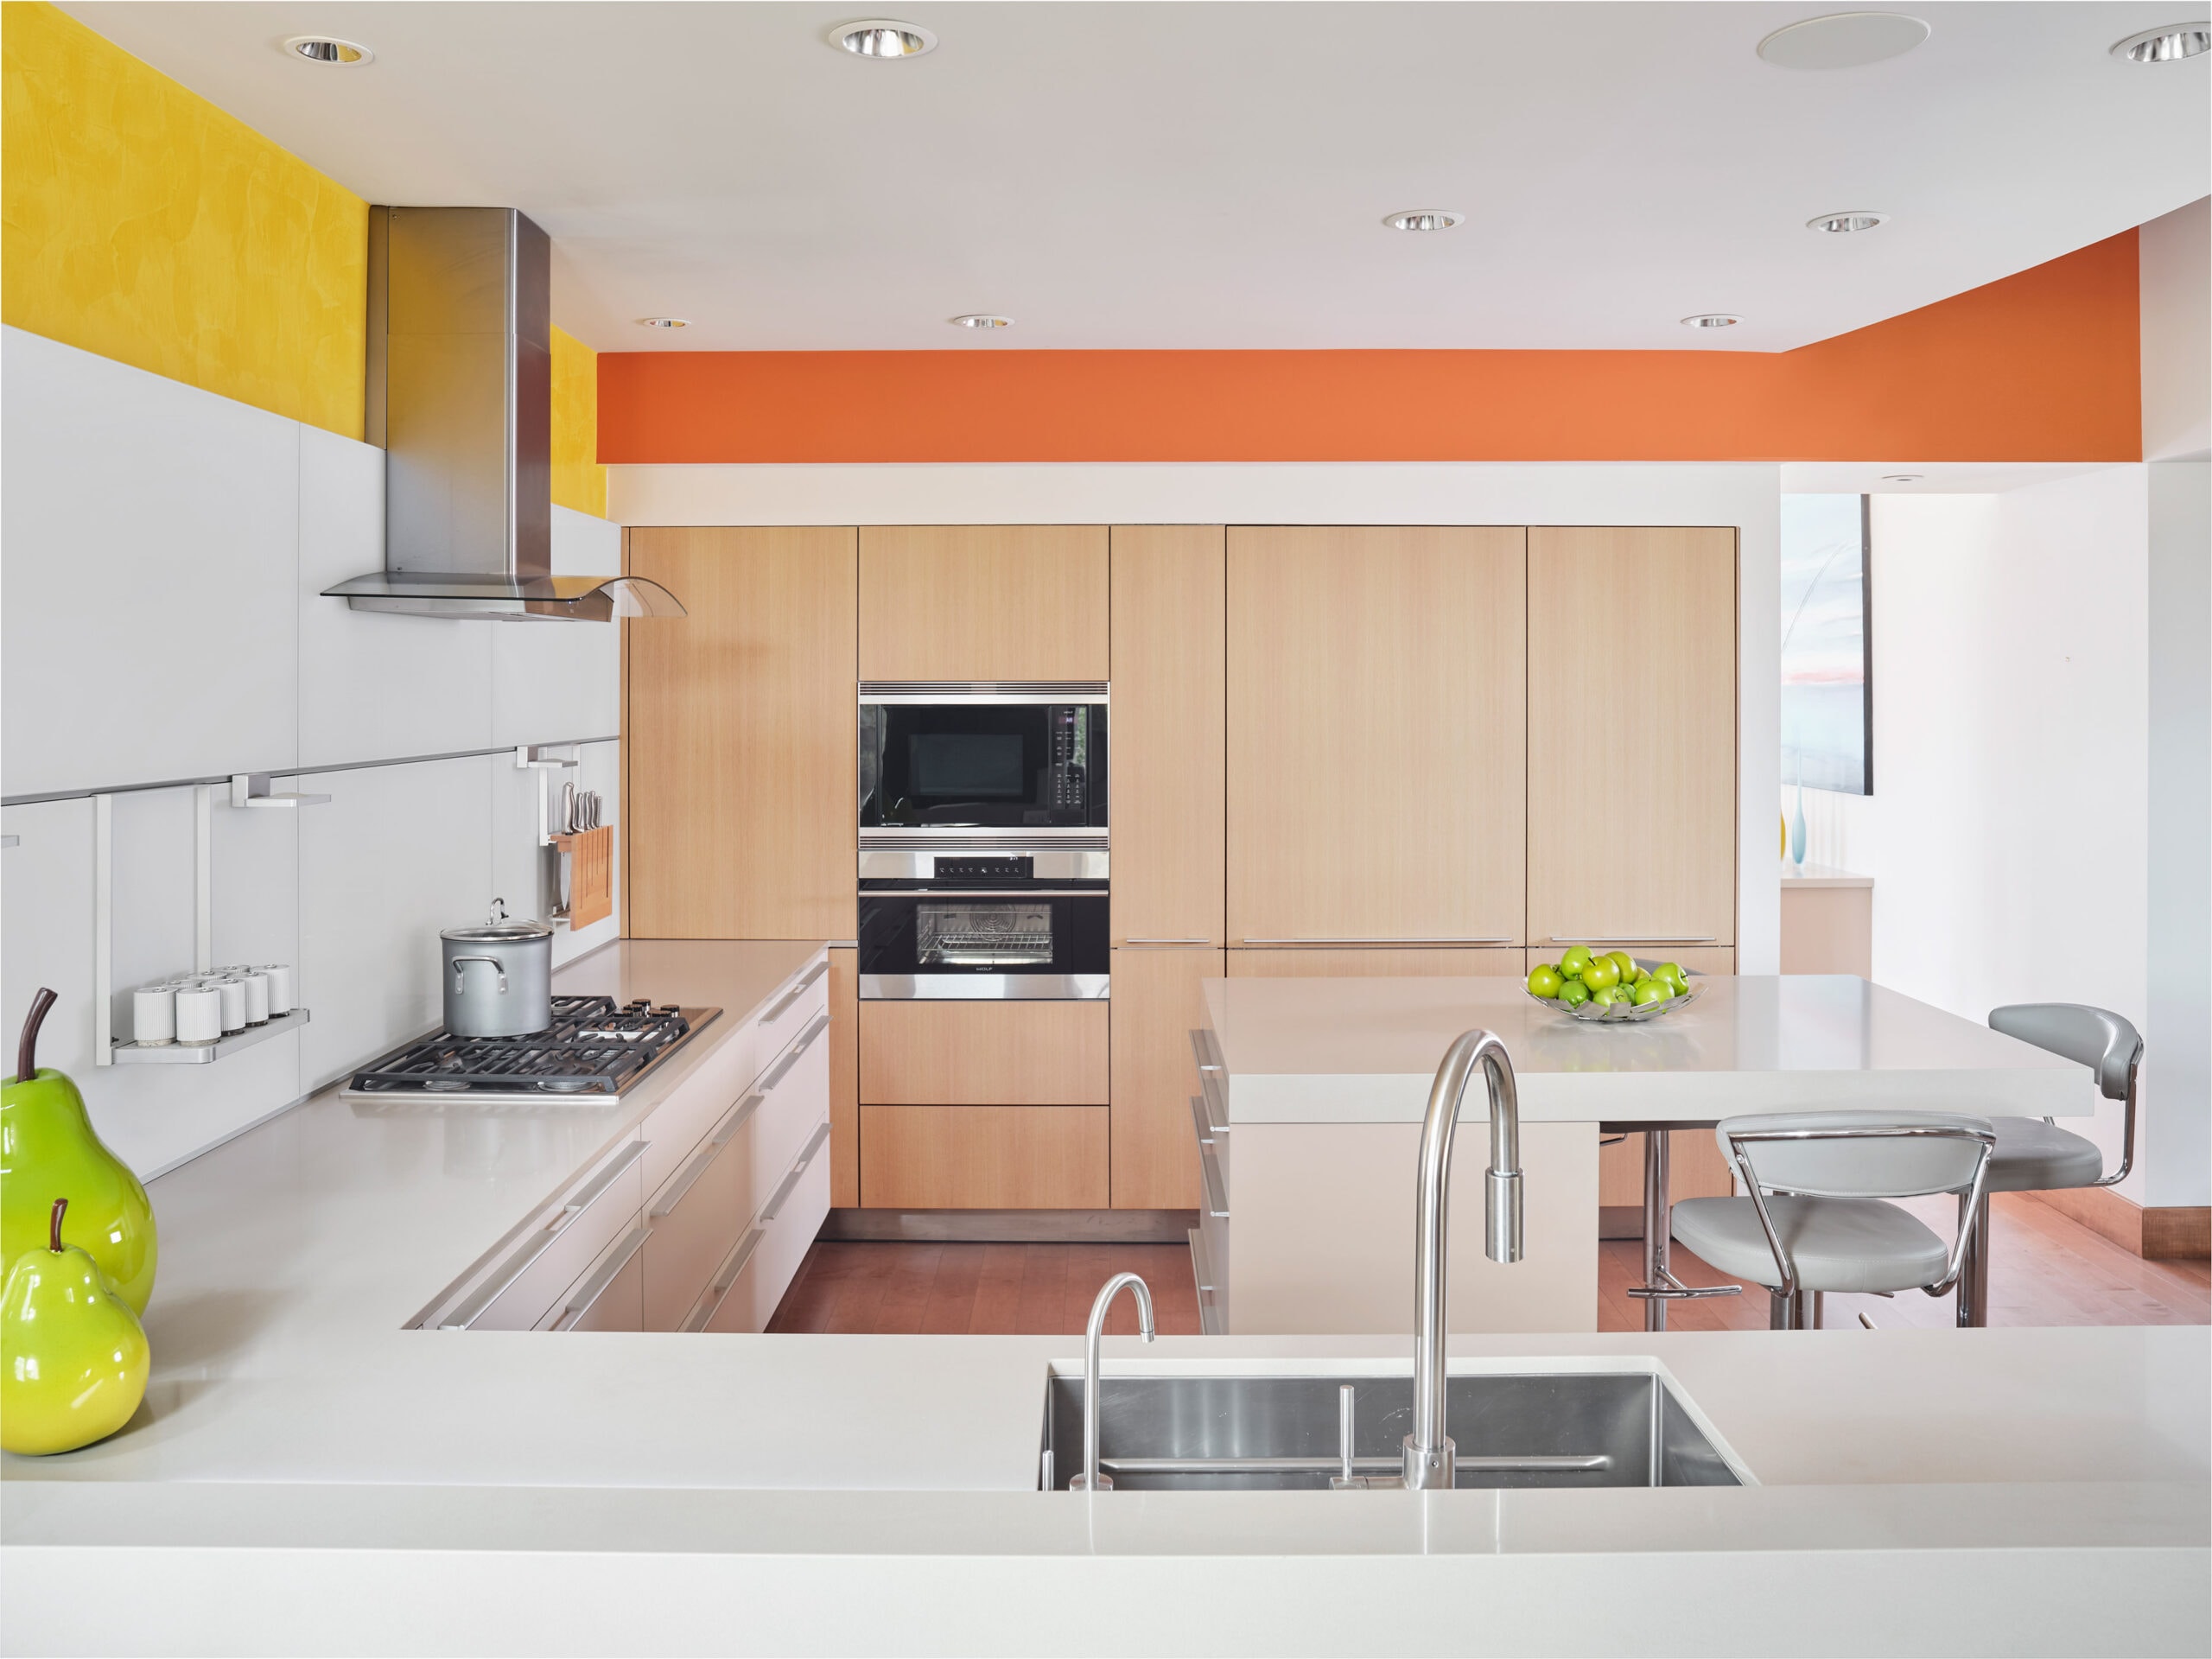 Sleek Bulthaup kitchen with colorful accent paint